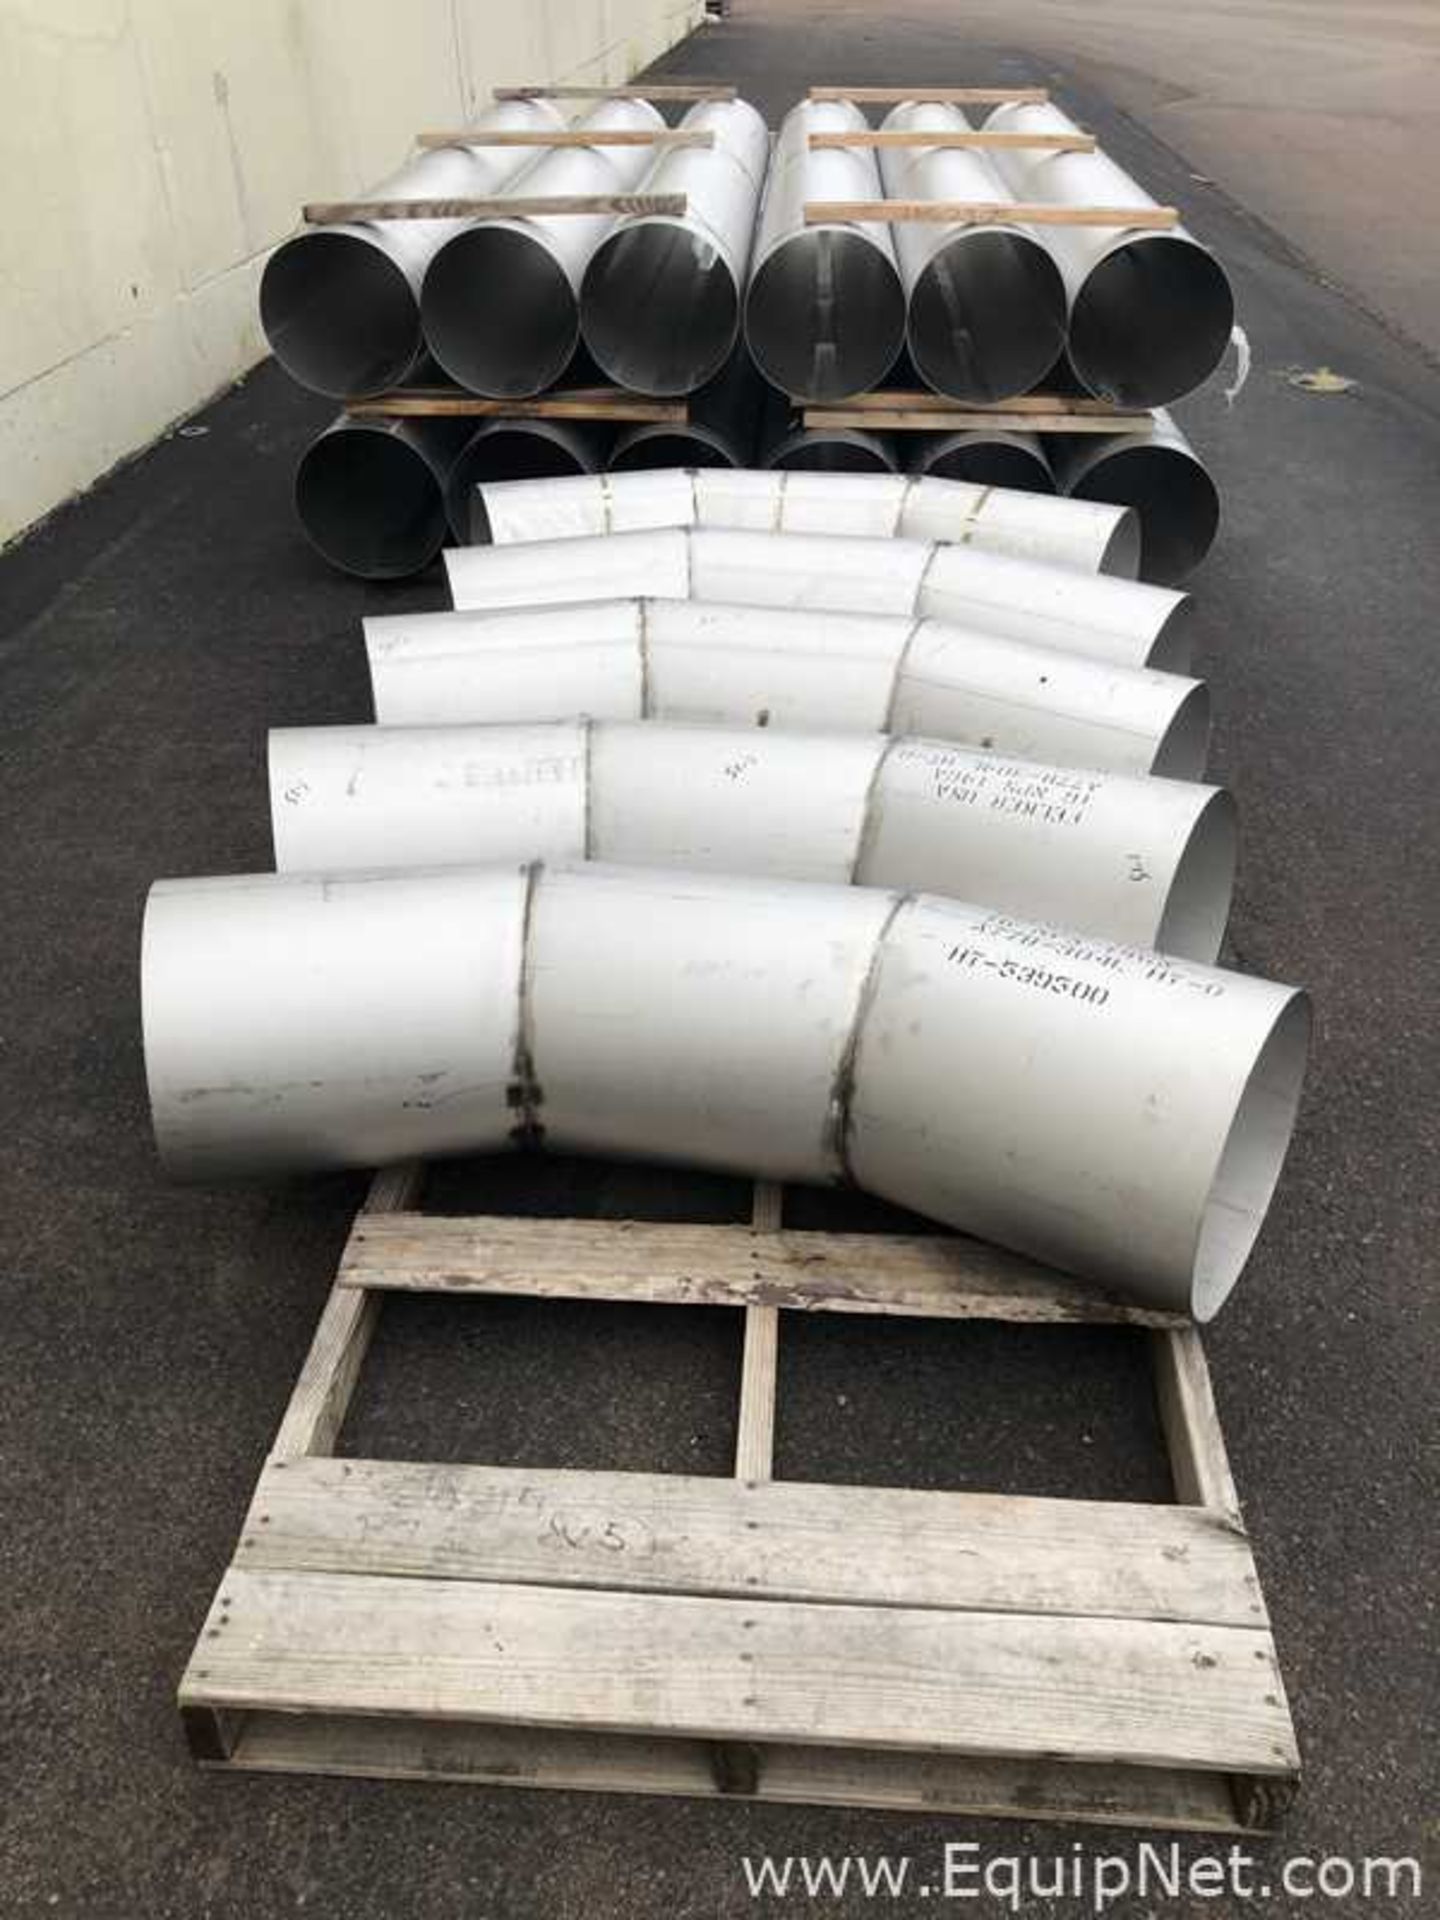 Lot Of Approx 15 Stainless Steel 304L Piping 16in diam X 150in Length Sections And Semi Elbows - Image 12 of 12